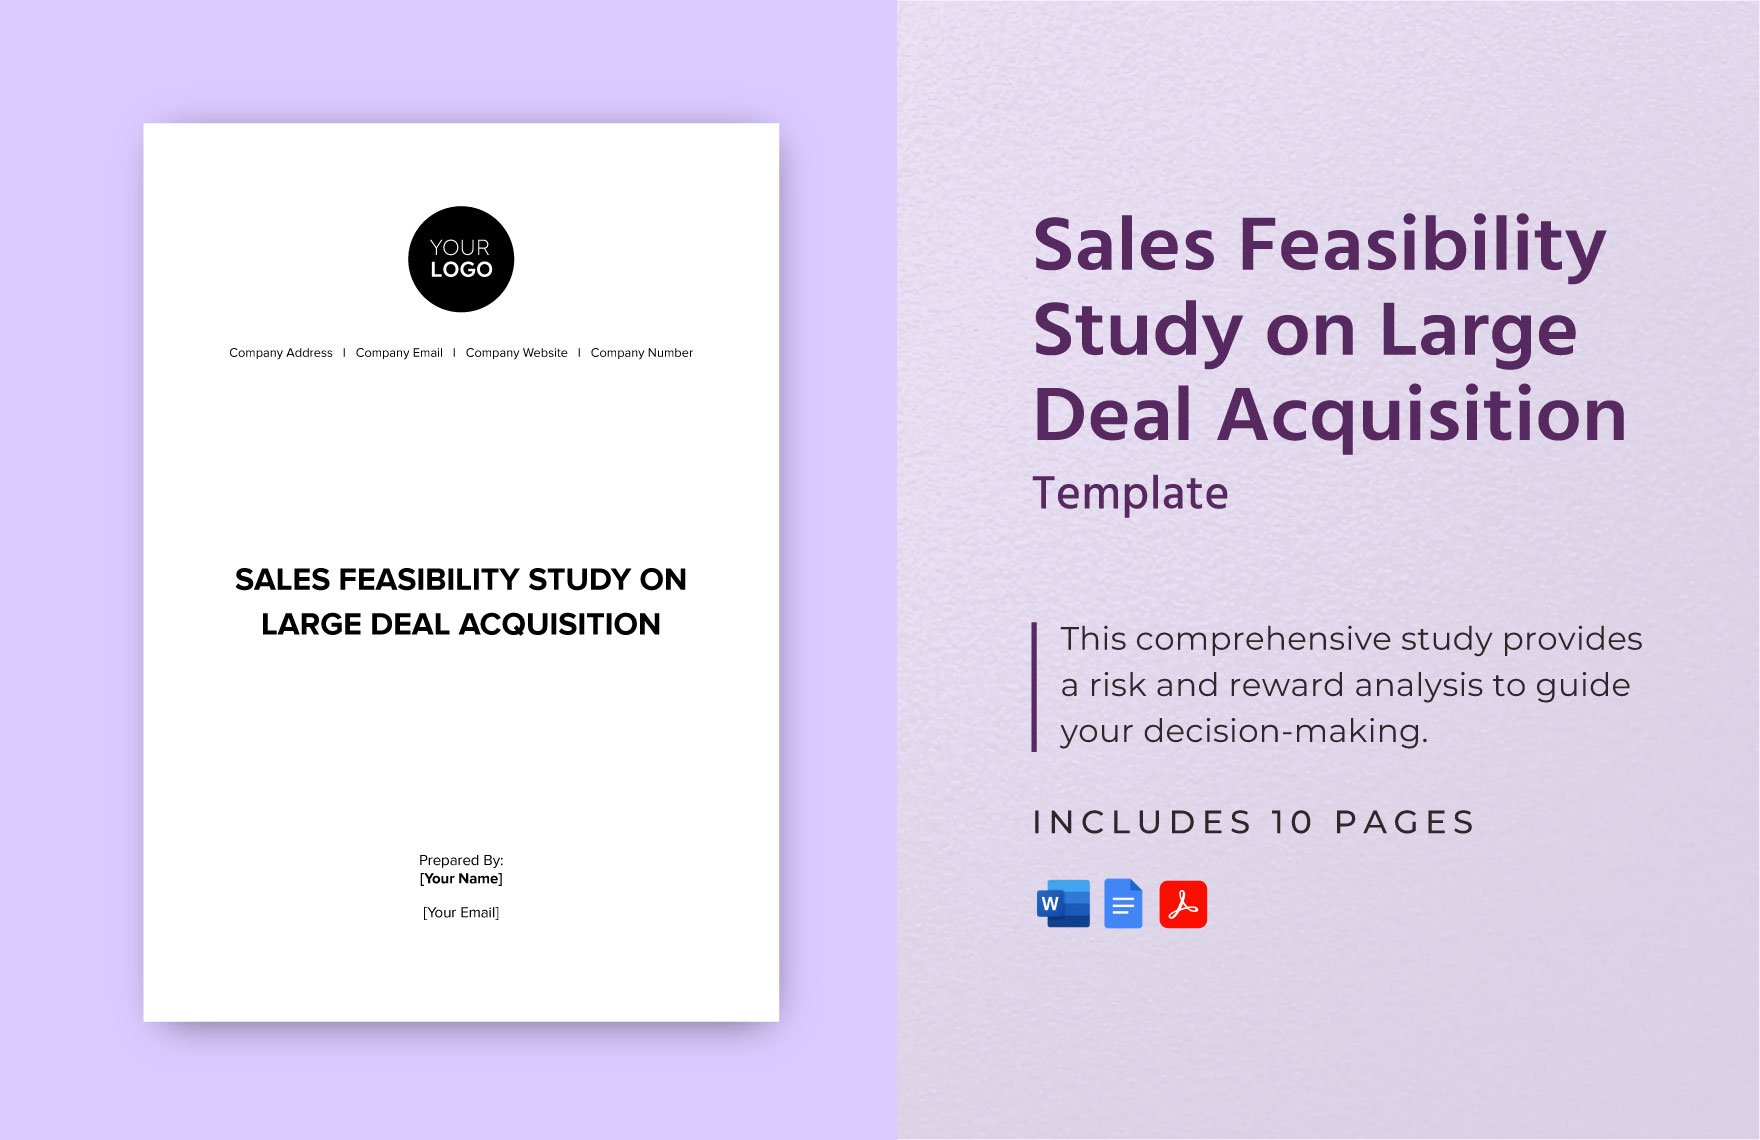 Sales Feasibility Study on Large Deal Acquisition Template